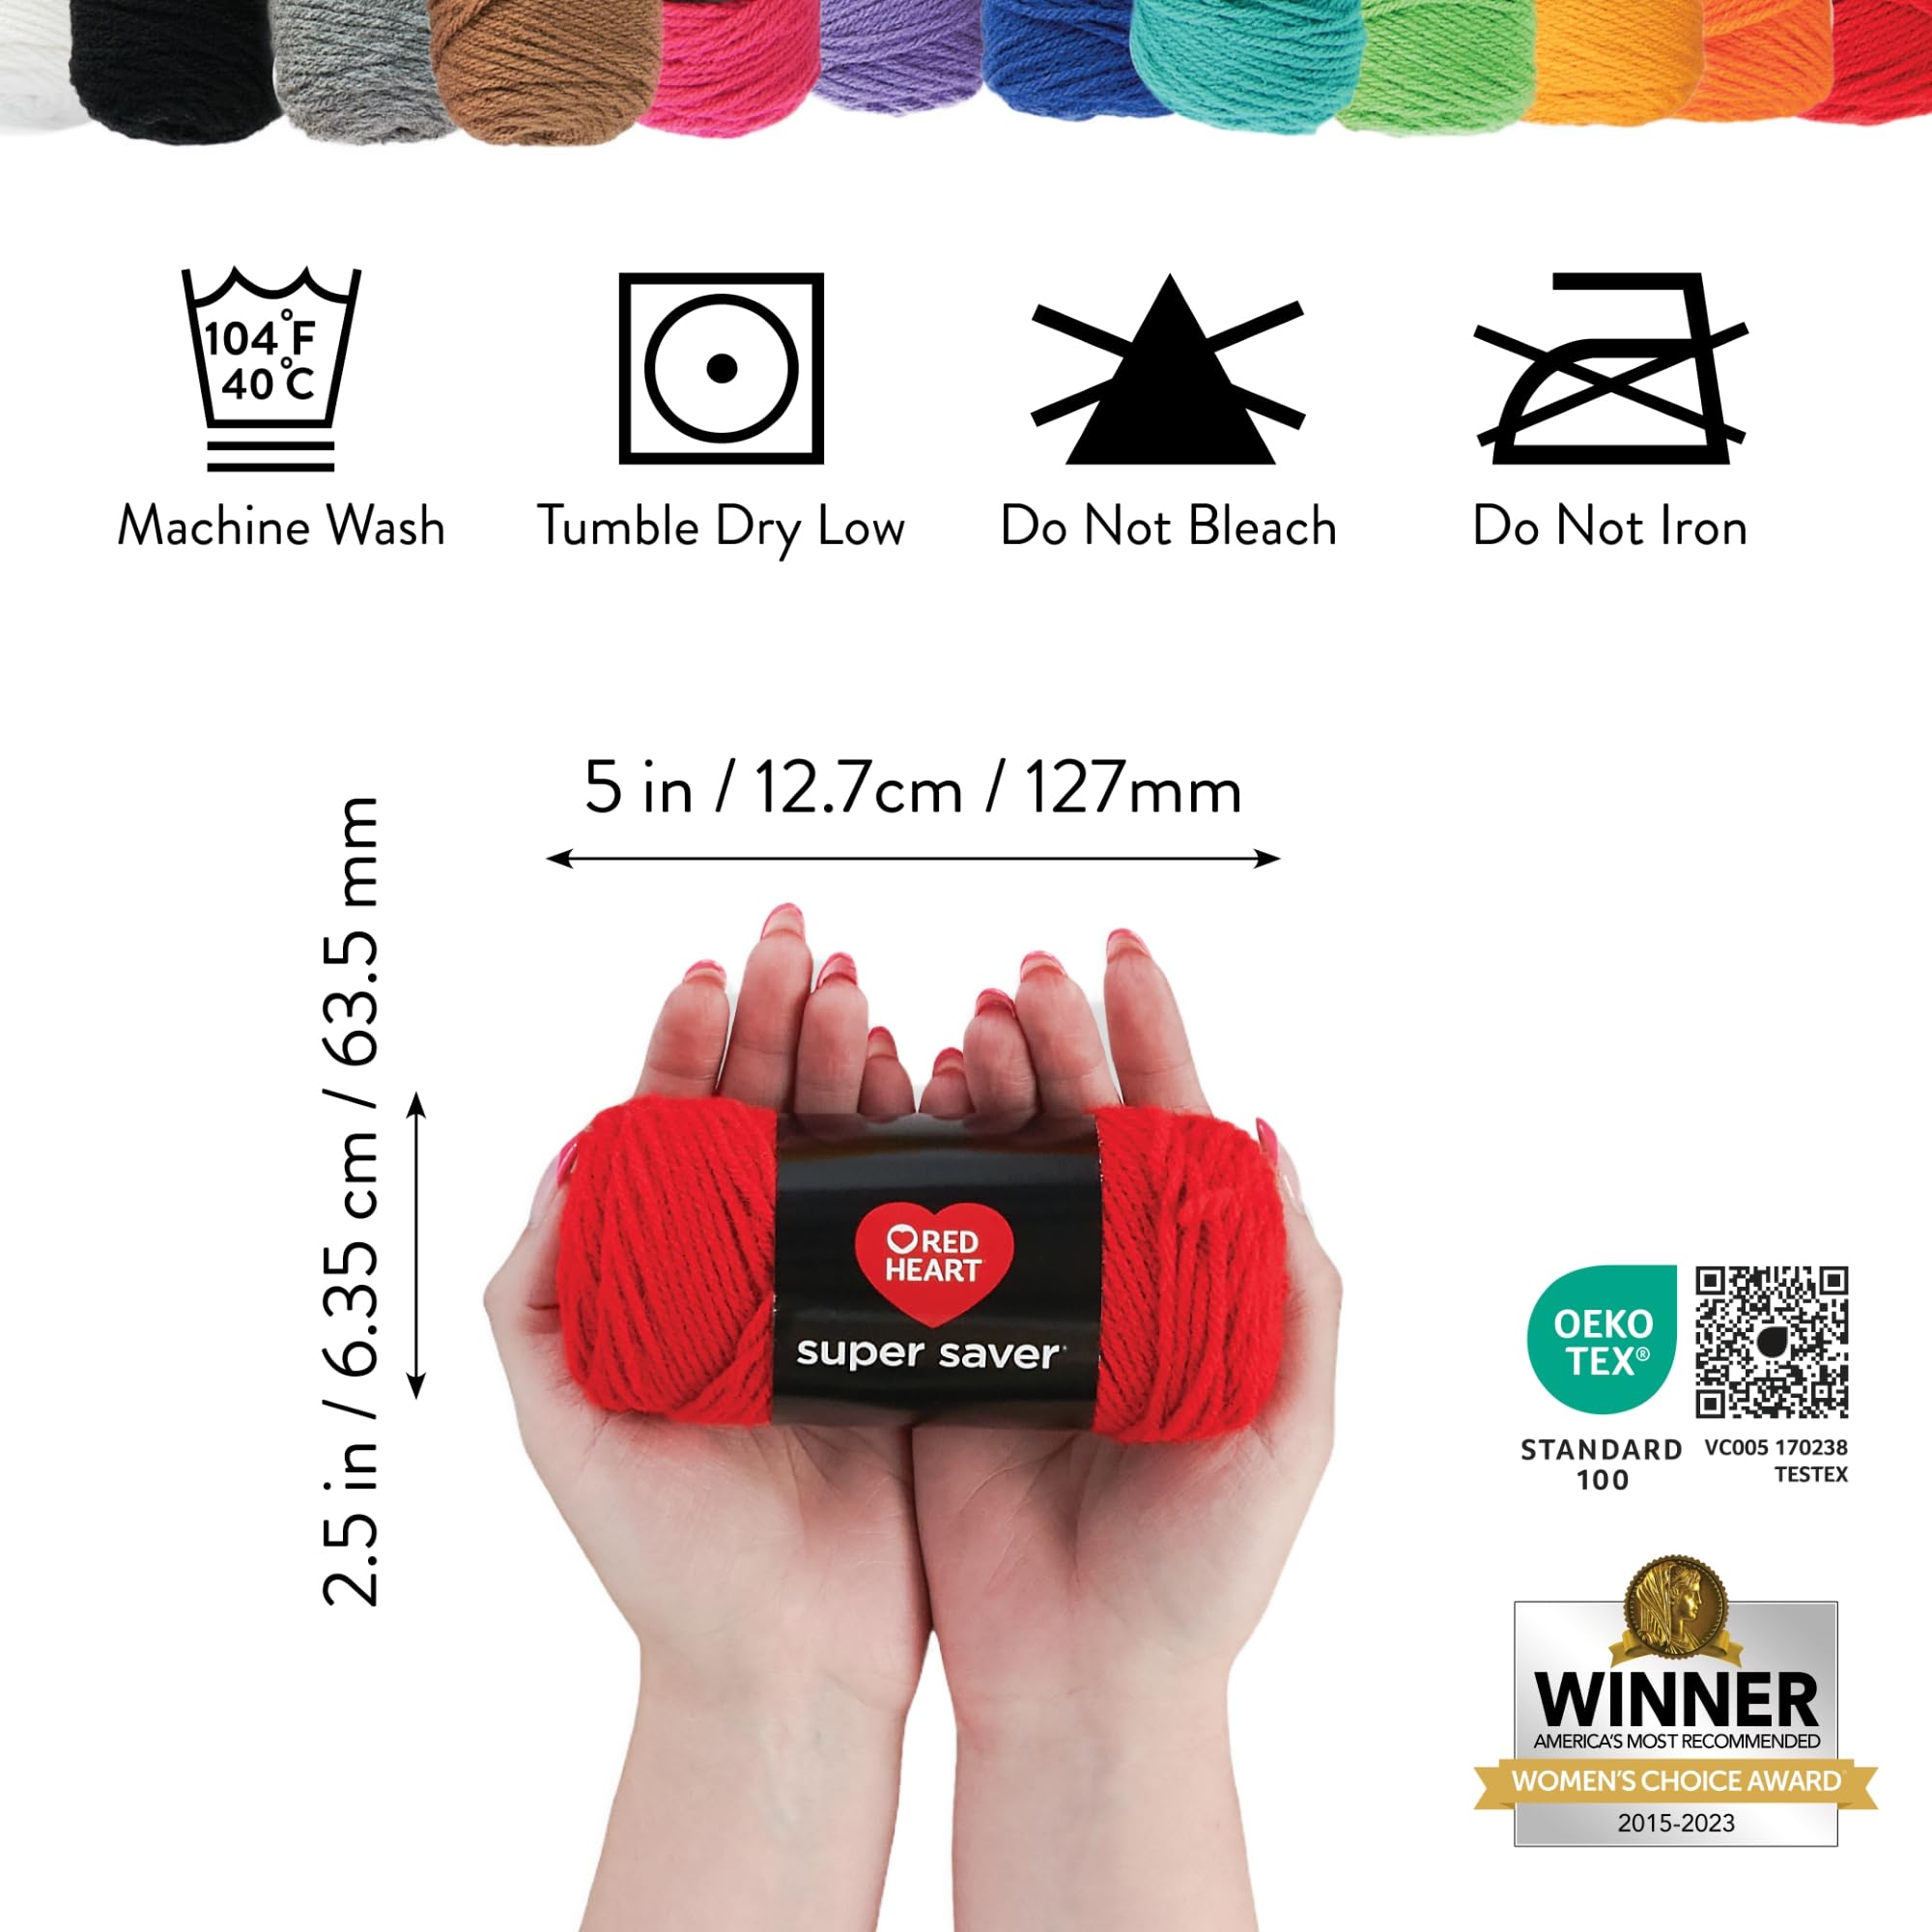 Red Heart Super Saver Soft Acrylic Yarn Beginners Knit Kit, with 12 Pack of 50g/1.7 oz. 4 Medium Worsted Yarn and Acceessories Knitting & Crocheting, for Chunky Sweaters, Blankets, Amigurumi